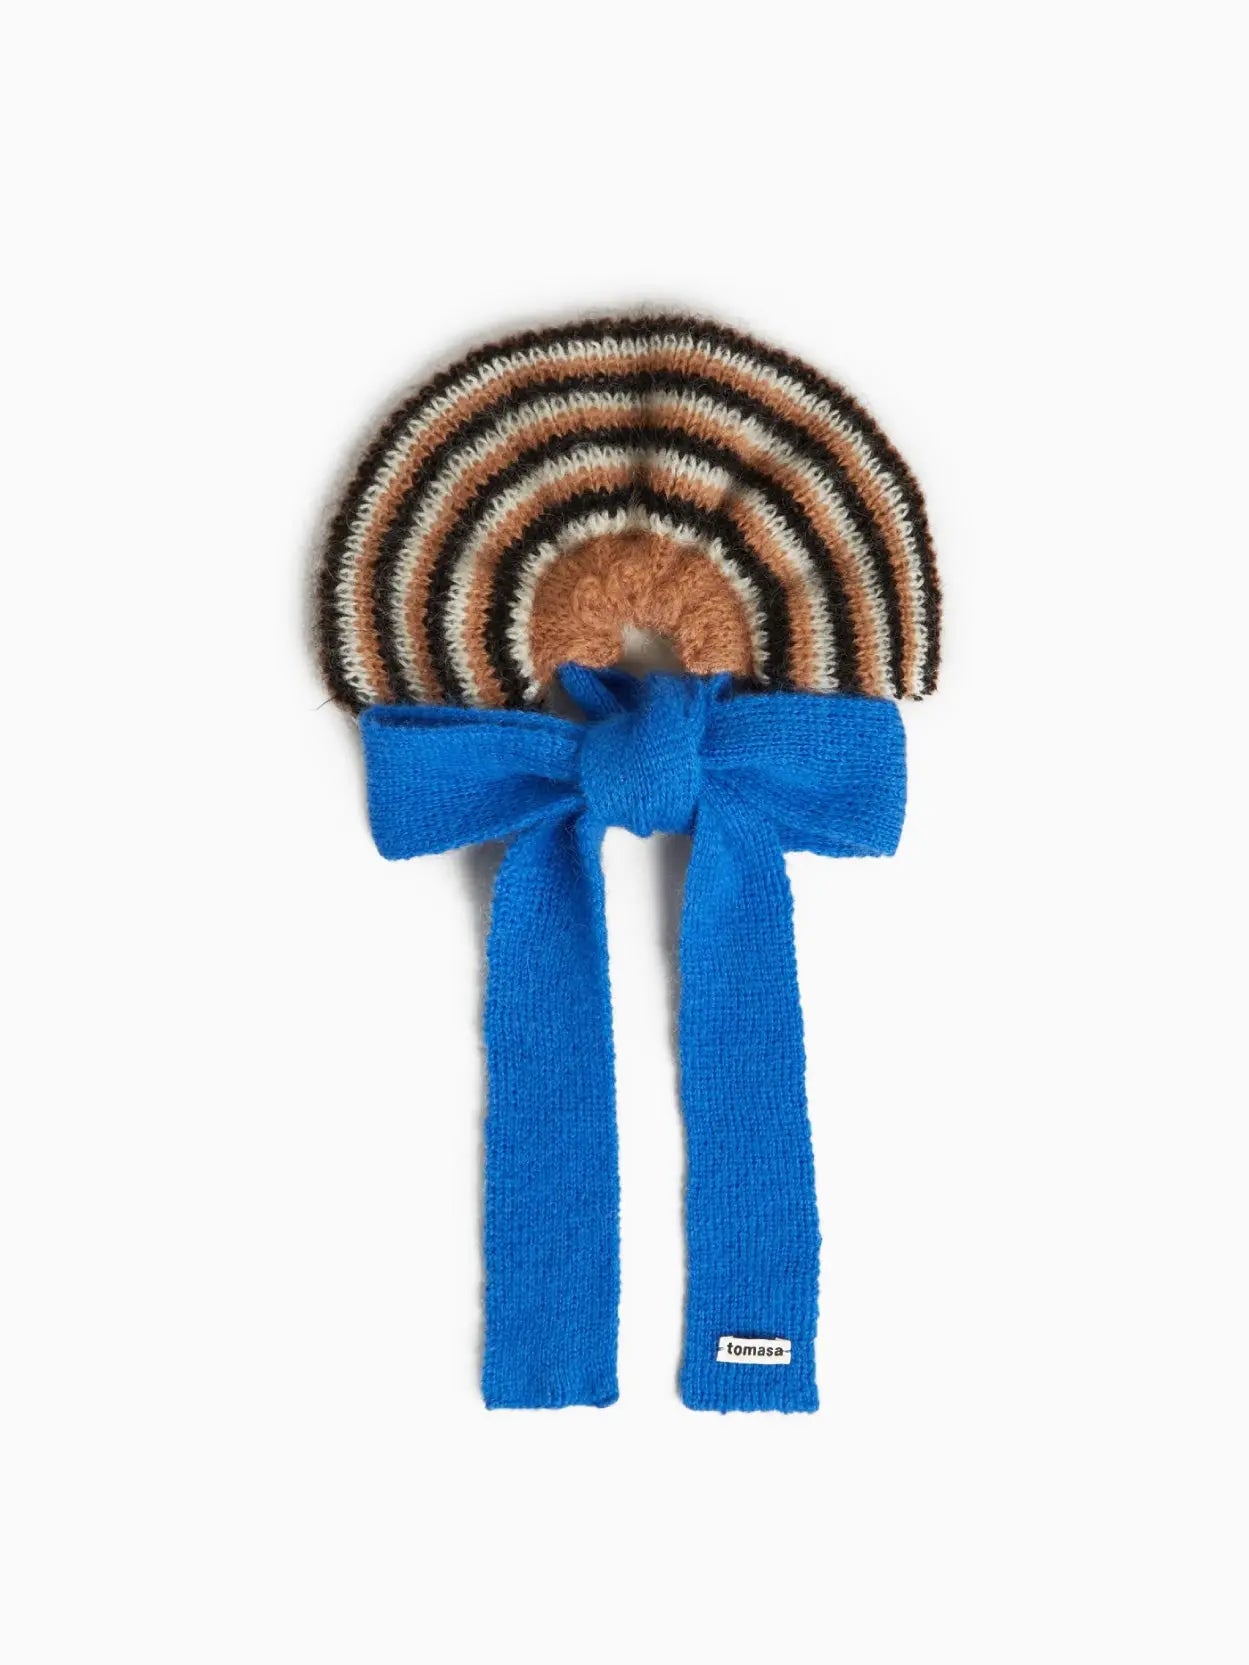 A Eugenia Bow Scrunchie designed with brown, cream, and black stripes in a circular pattern. Attached is a bright blue knitted scarf tied in a front knot, featuring a small white label with the brand name "Tomasa." Available exclusively at Bassalstore in Barcelona, the scrunchie and scarf appear as a single accessory.